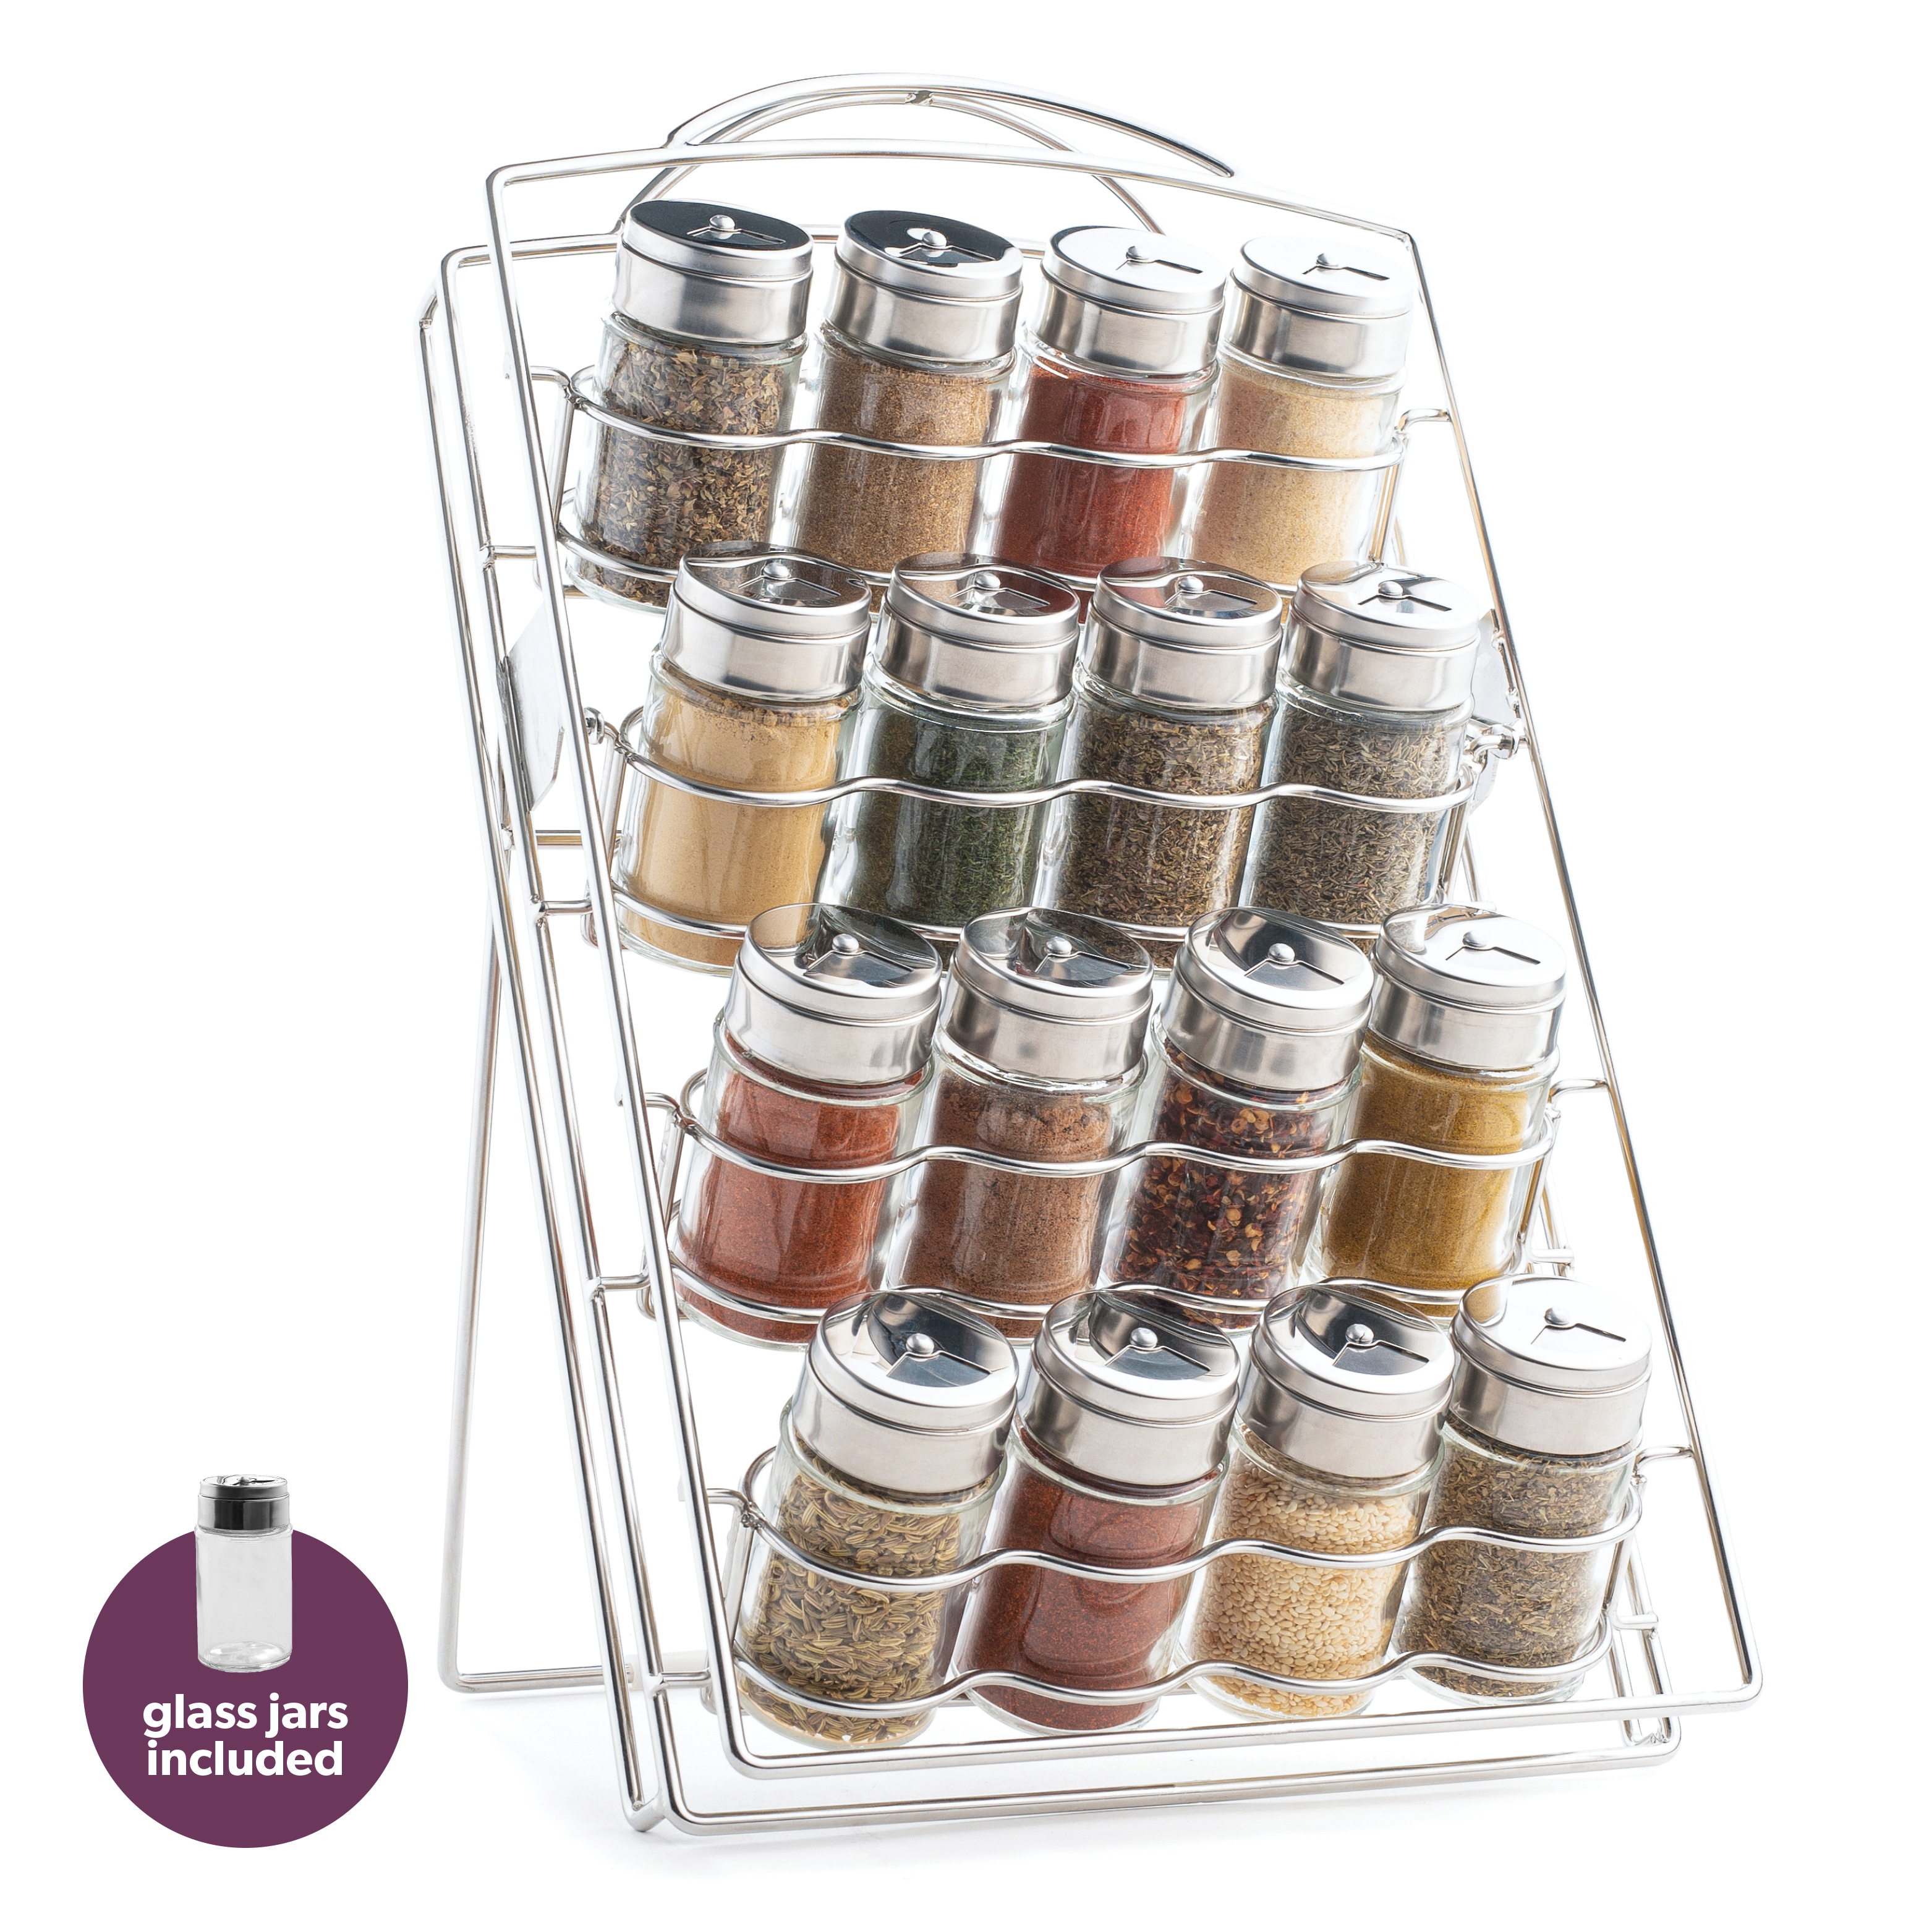 Spices and Jars Included Kamenstein 16-Jar Revolving Chrome Wire Spice Rack 